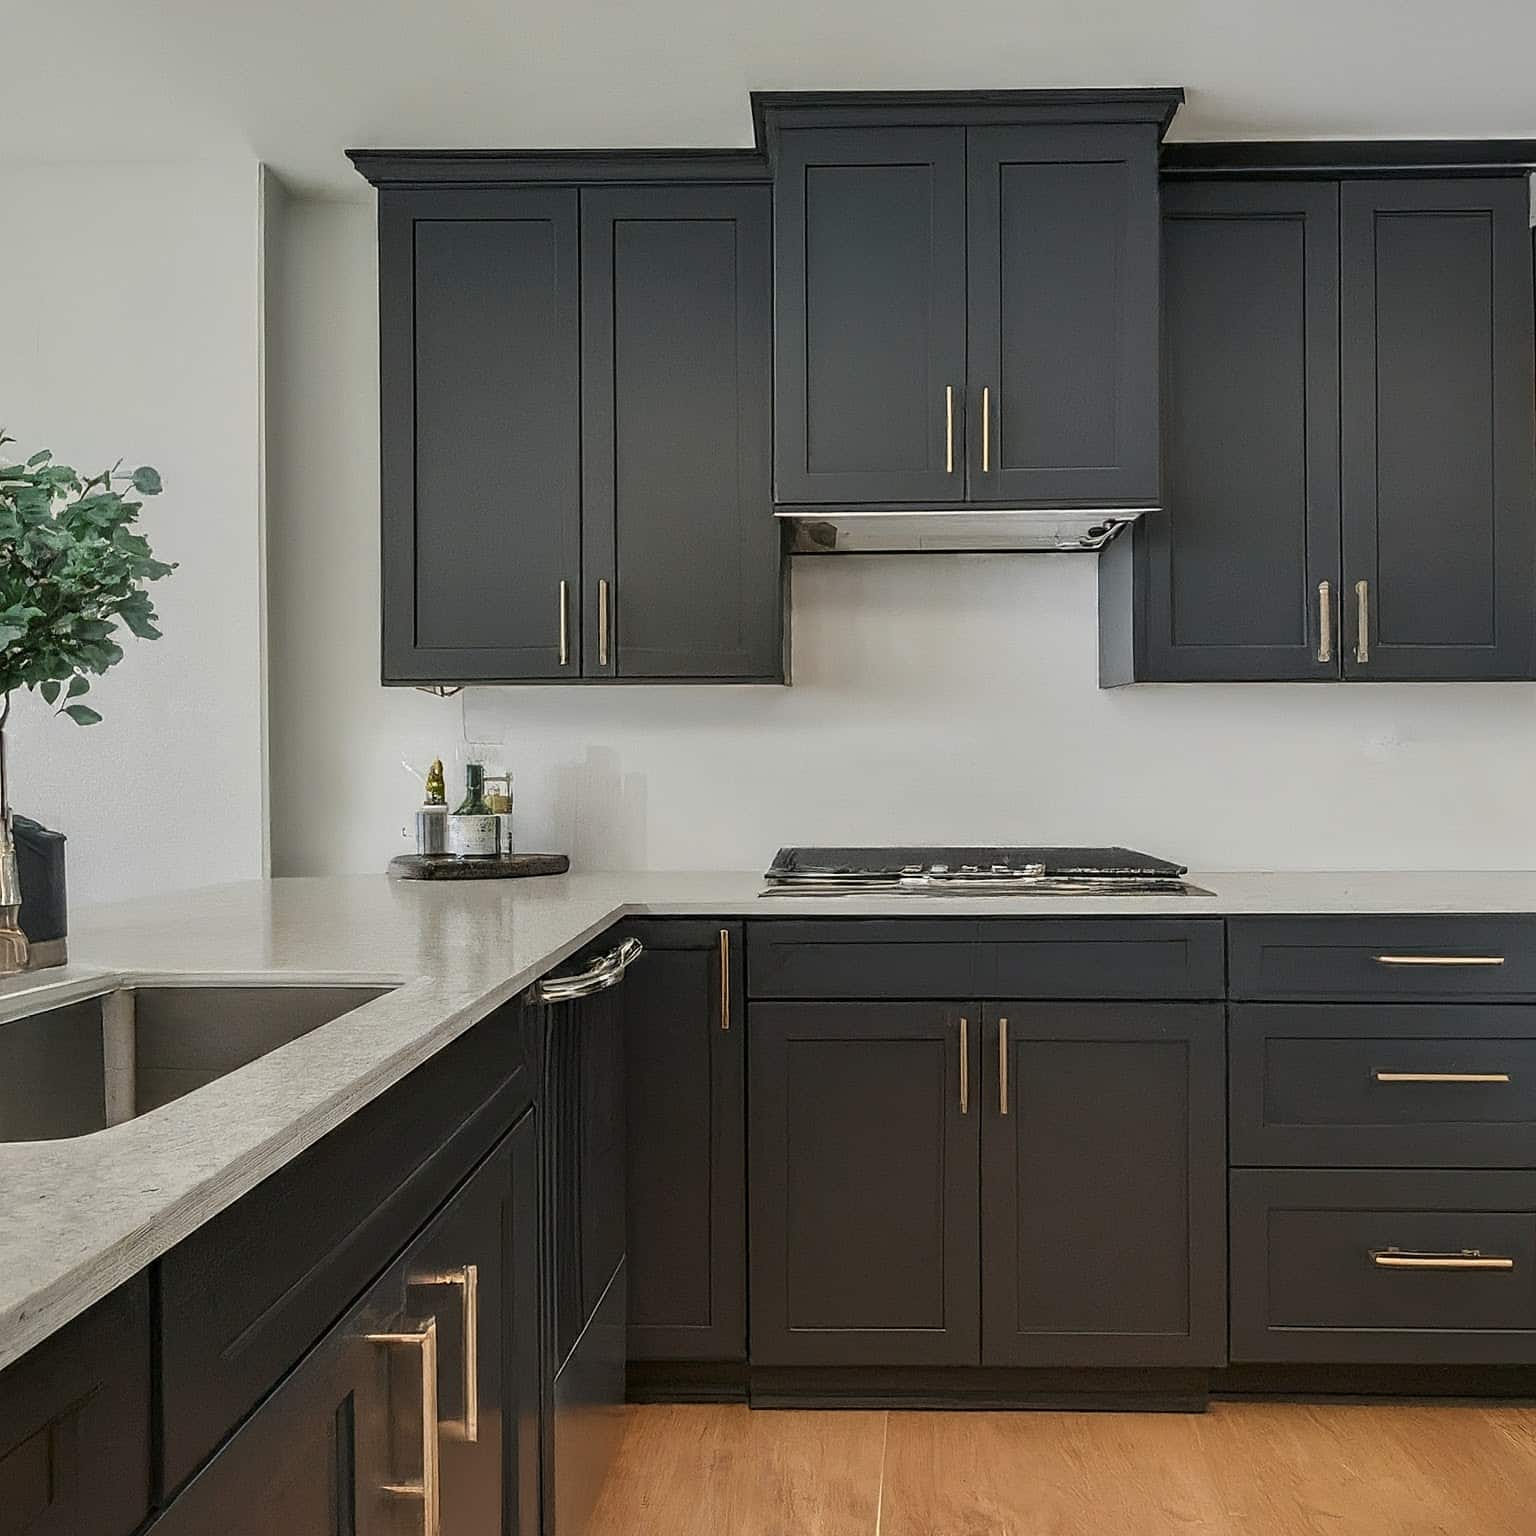 Black shaker-style cabinetry